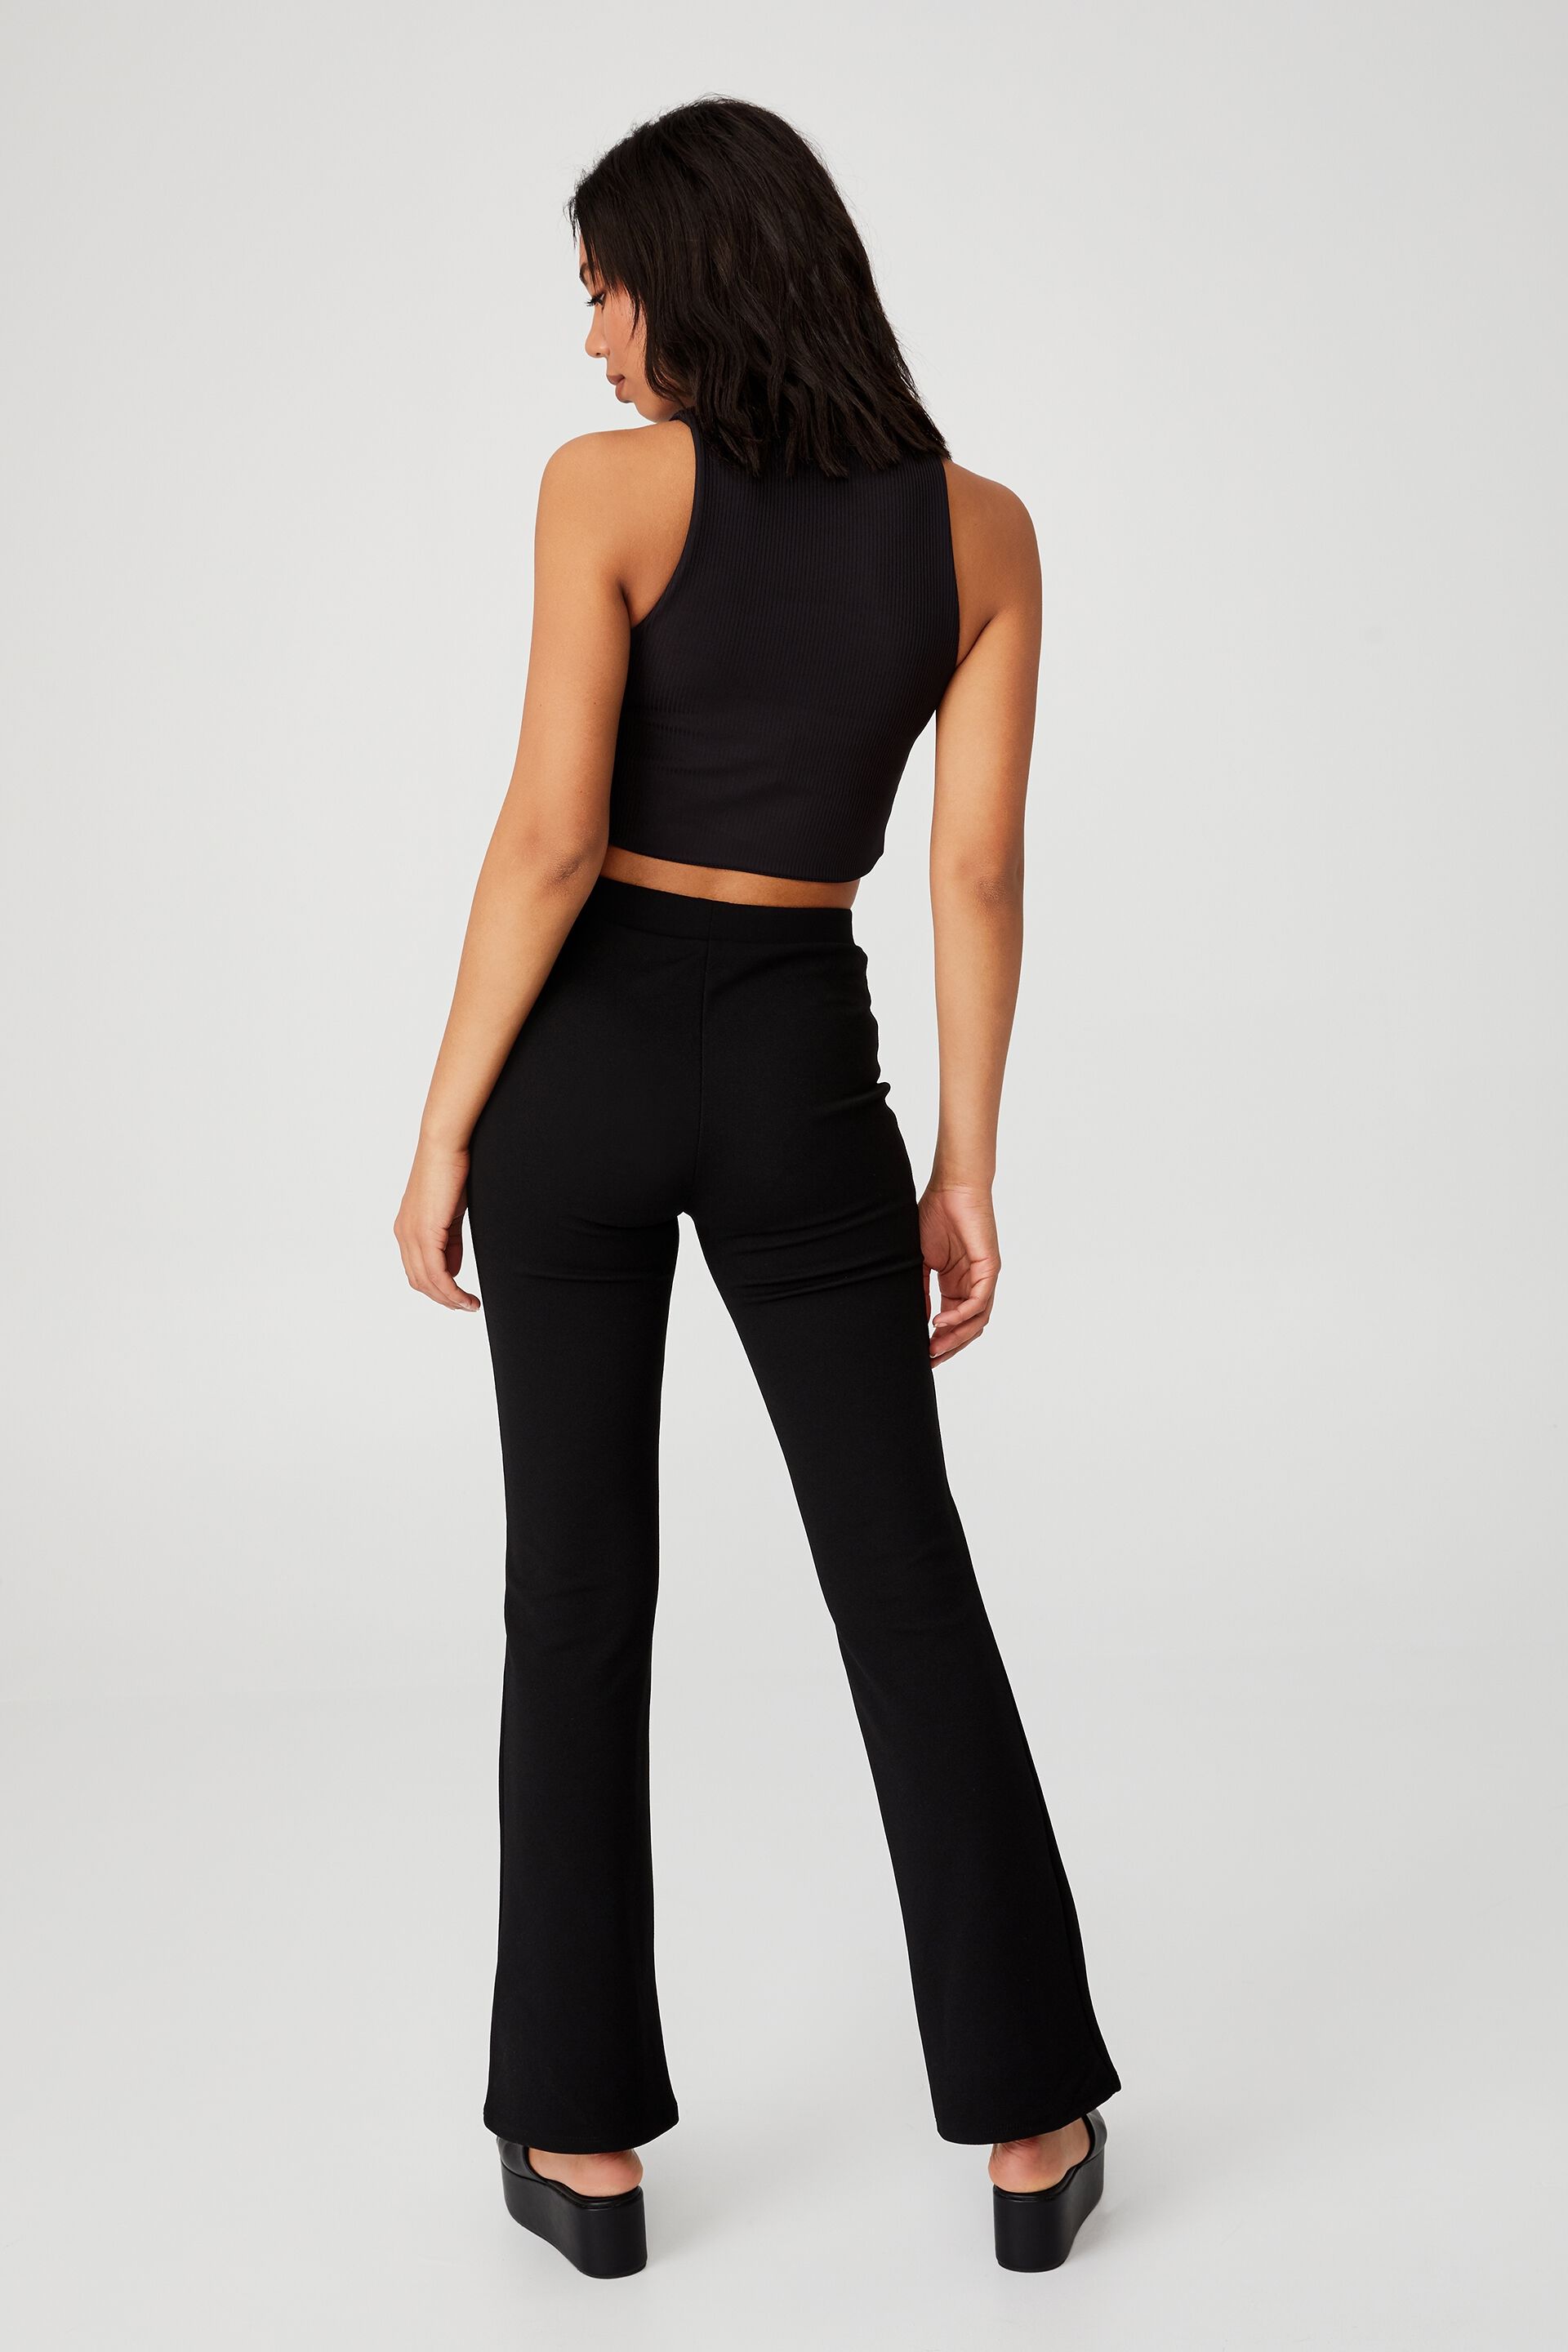 Buy Black Trousers & Pants for Women by ASHTAG Online | Ajio.com